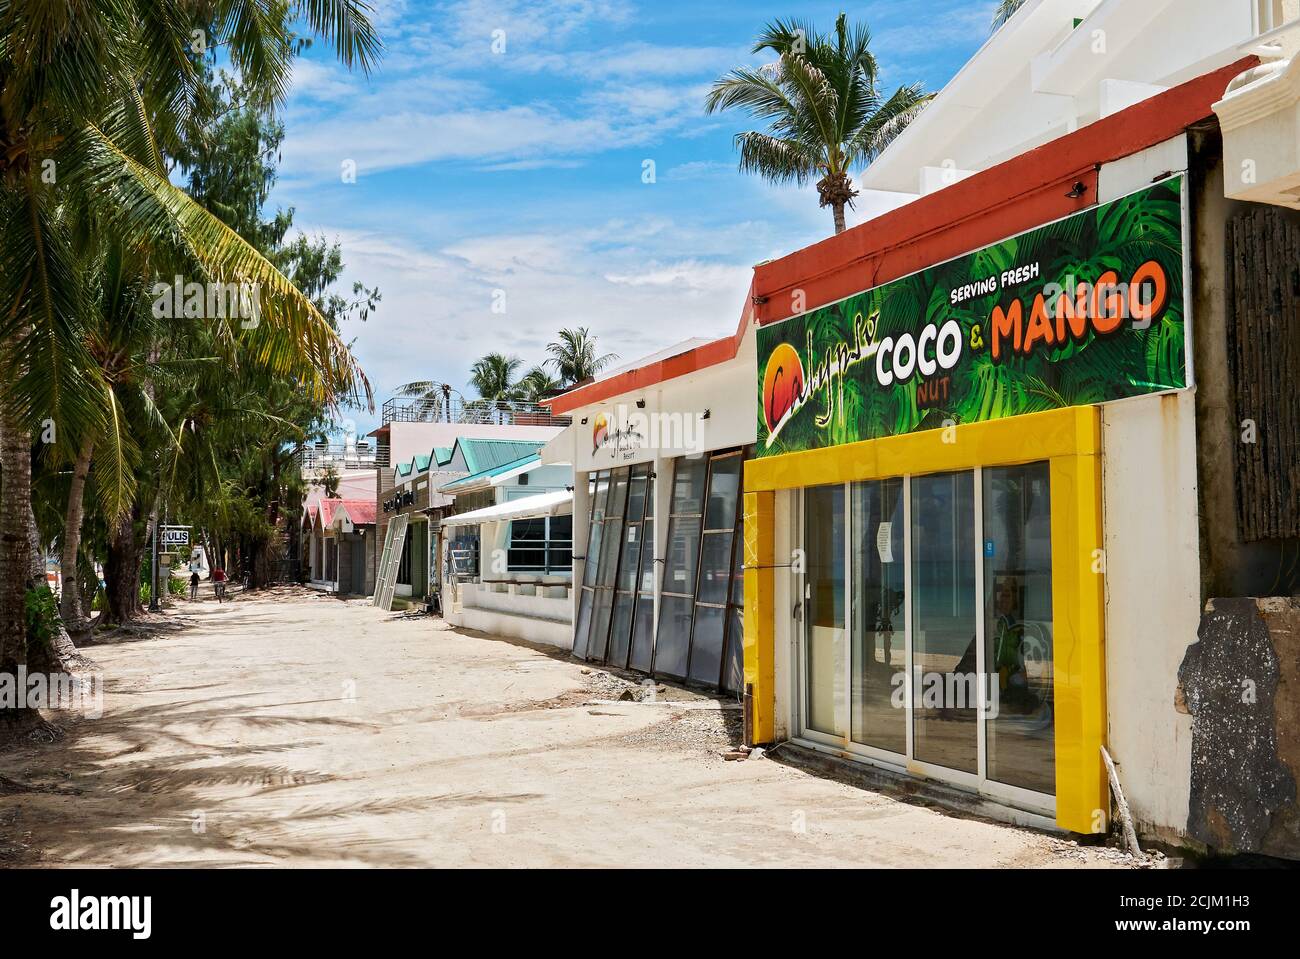 Restaurants and shops on Boracay Island along the White Beach are closed and barricaded because of the shut-down order caused by the Corona pandemic Stock Photo